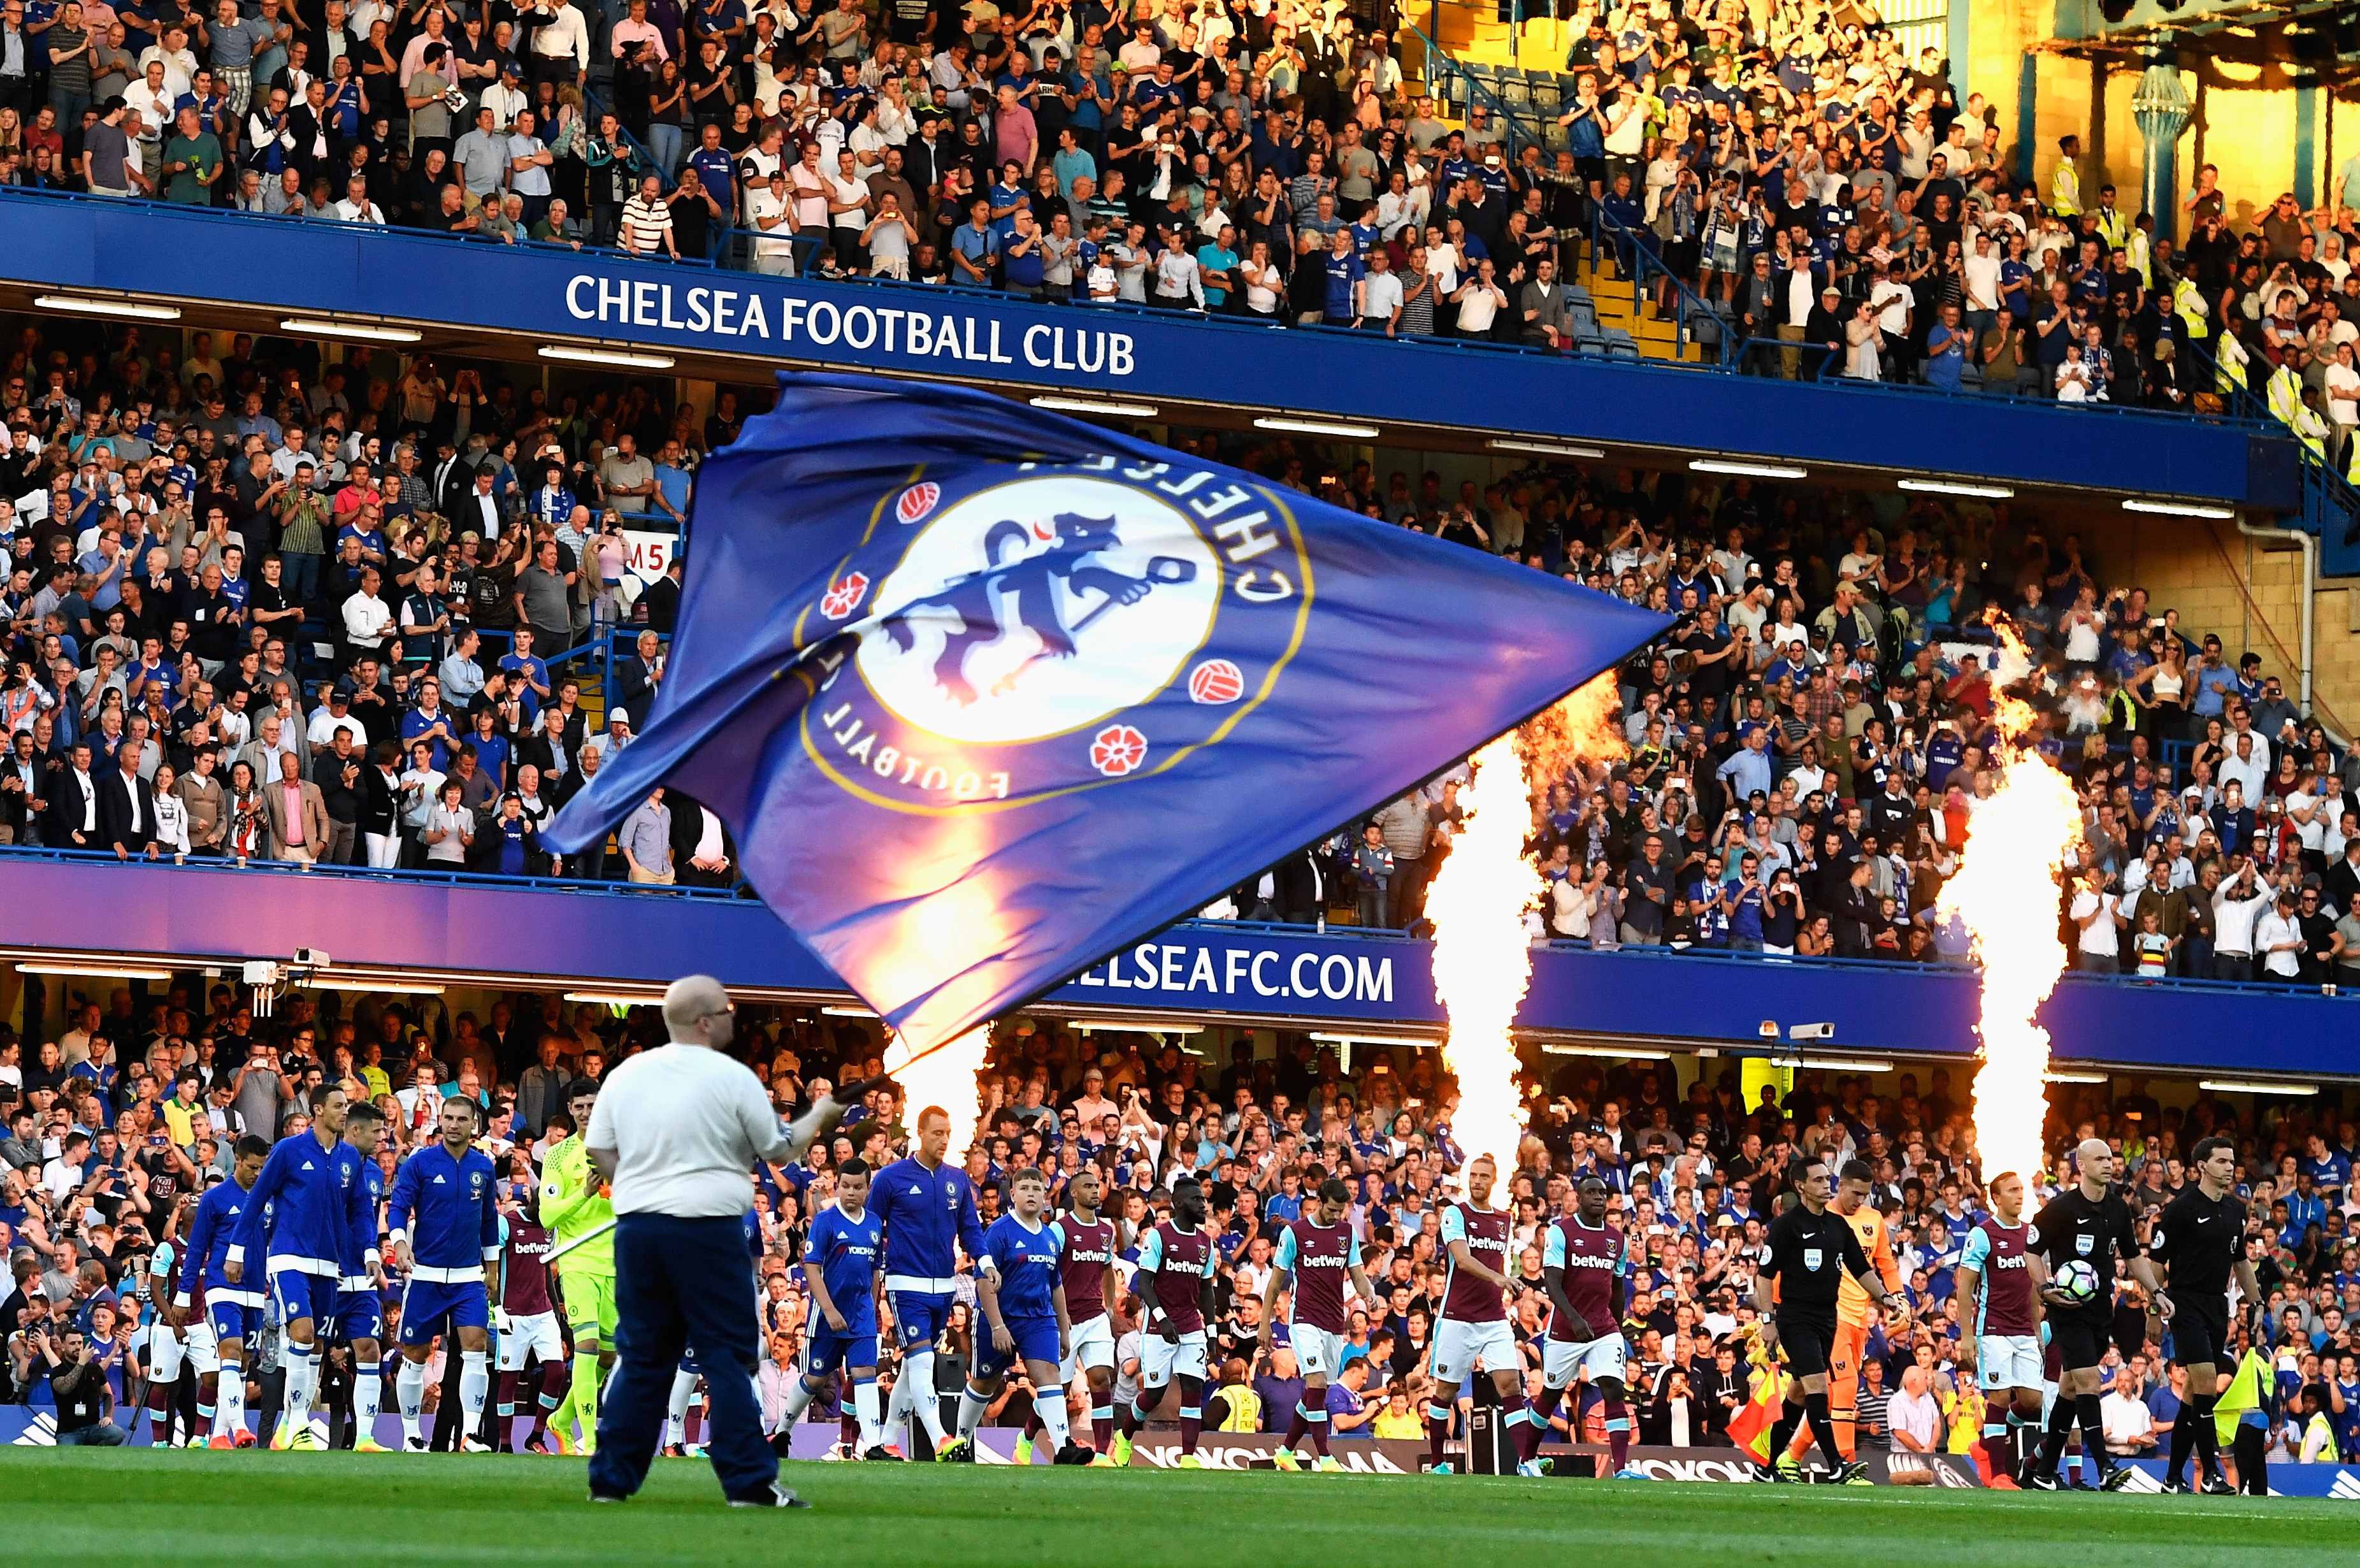 LONDON, ENGLAND - AUGUST 15: The teams walk out during the Premier League match between Chelsea and West Ham United at Stamford Bridge on August 15, 2016 in London, England.  (Photo by Mike Hewitt/Getty Images)